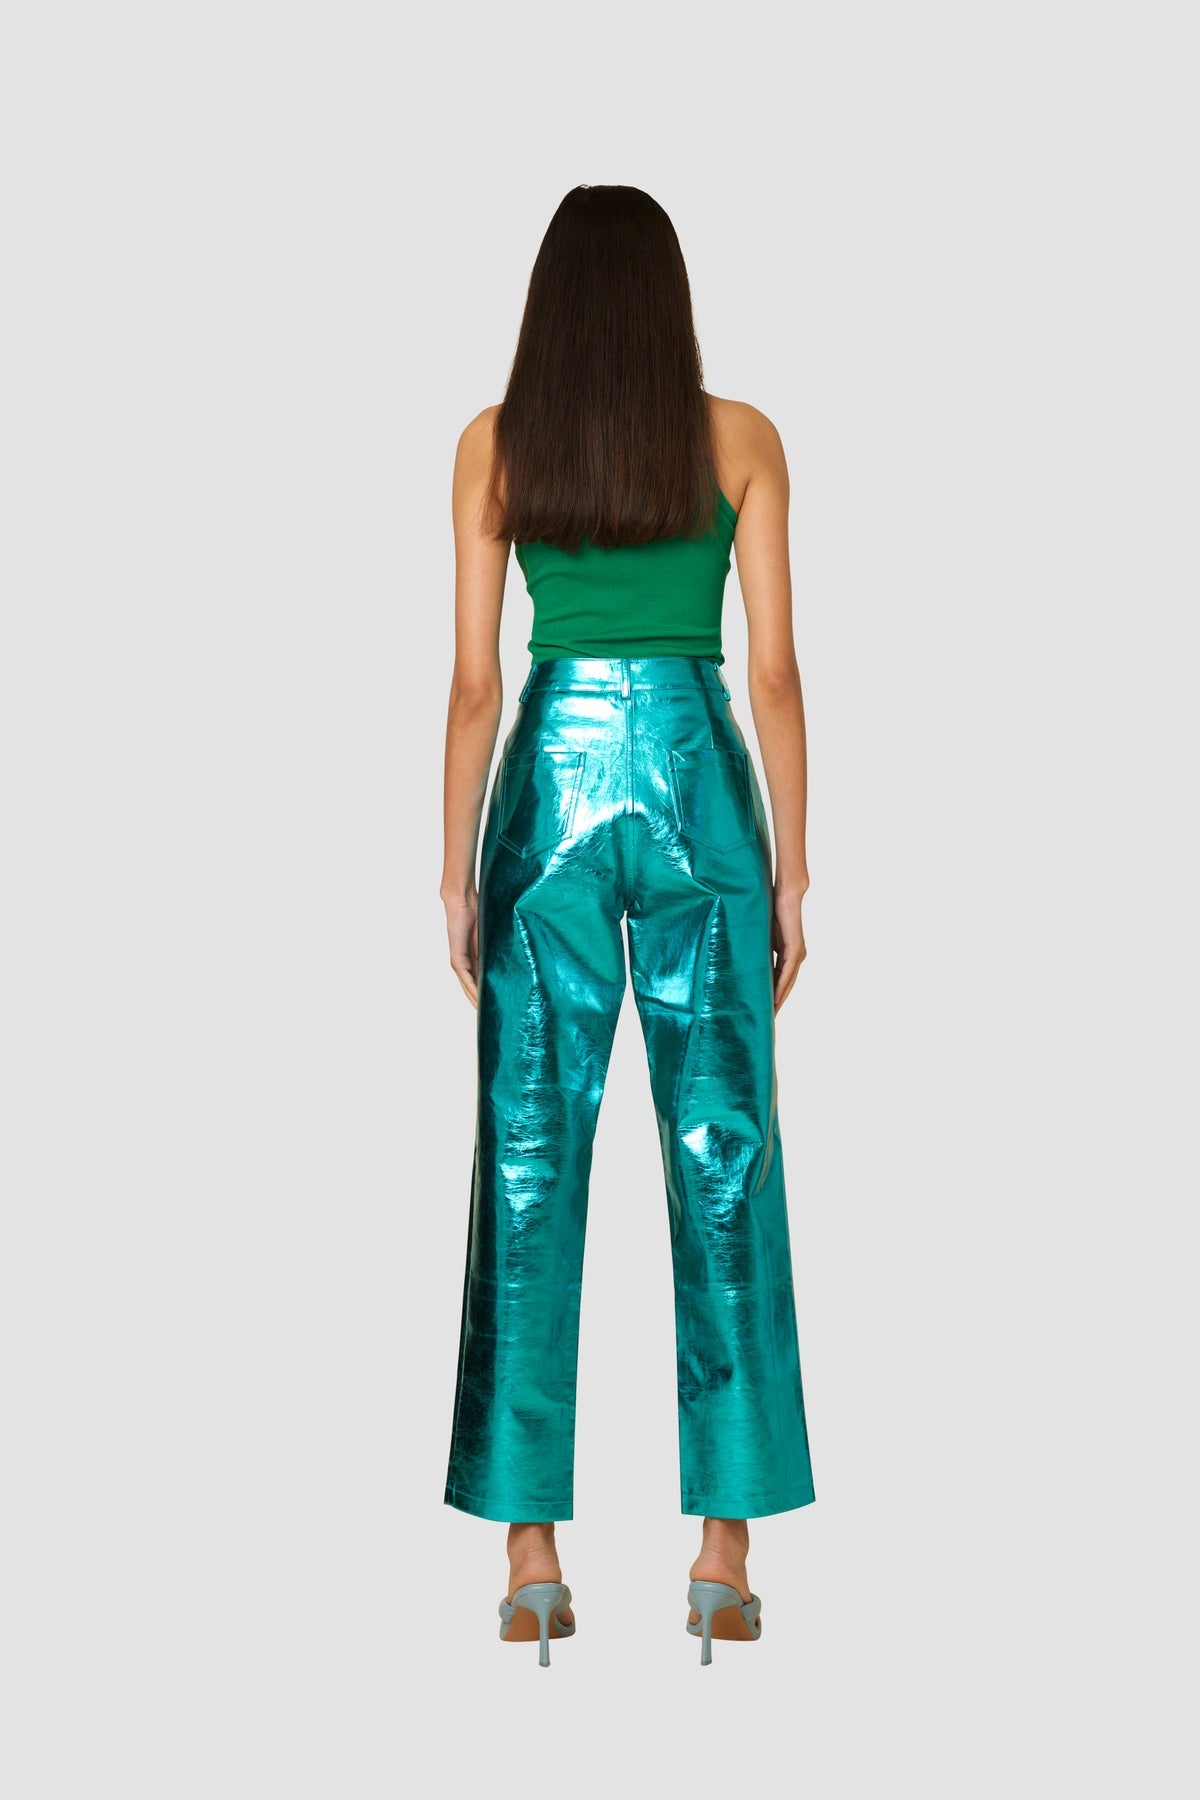 Lupe Blue Metallic Trousers – Saffire Clothing